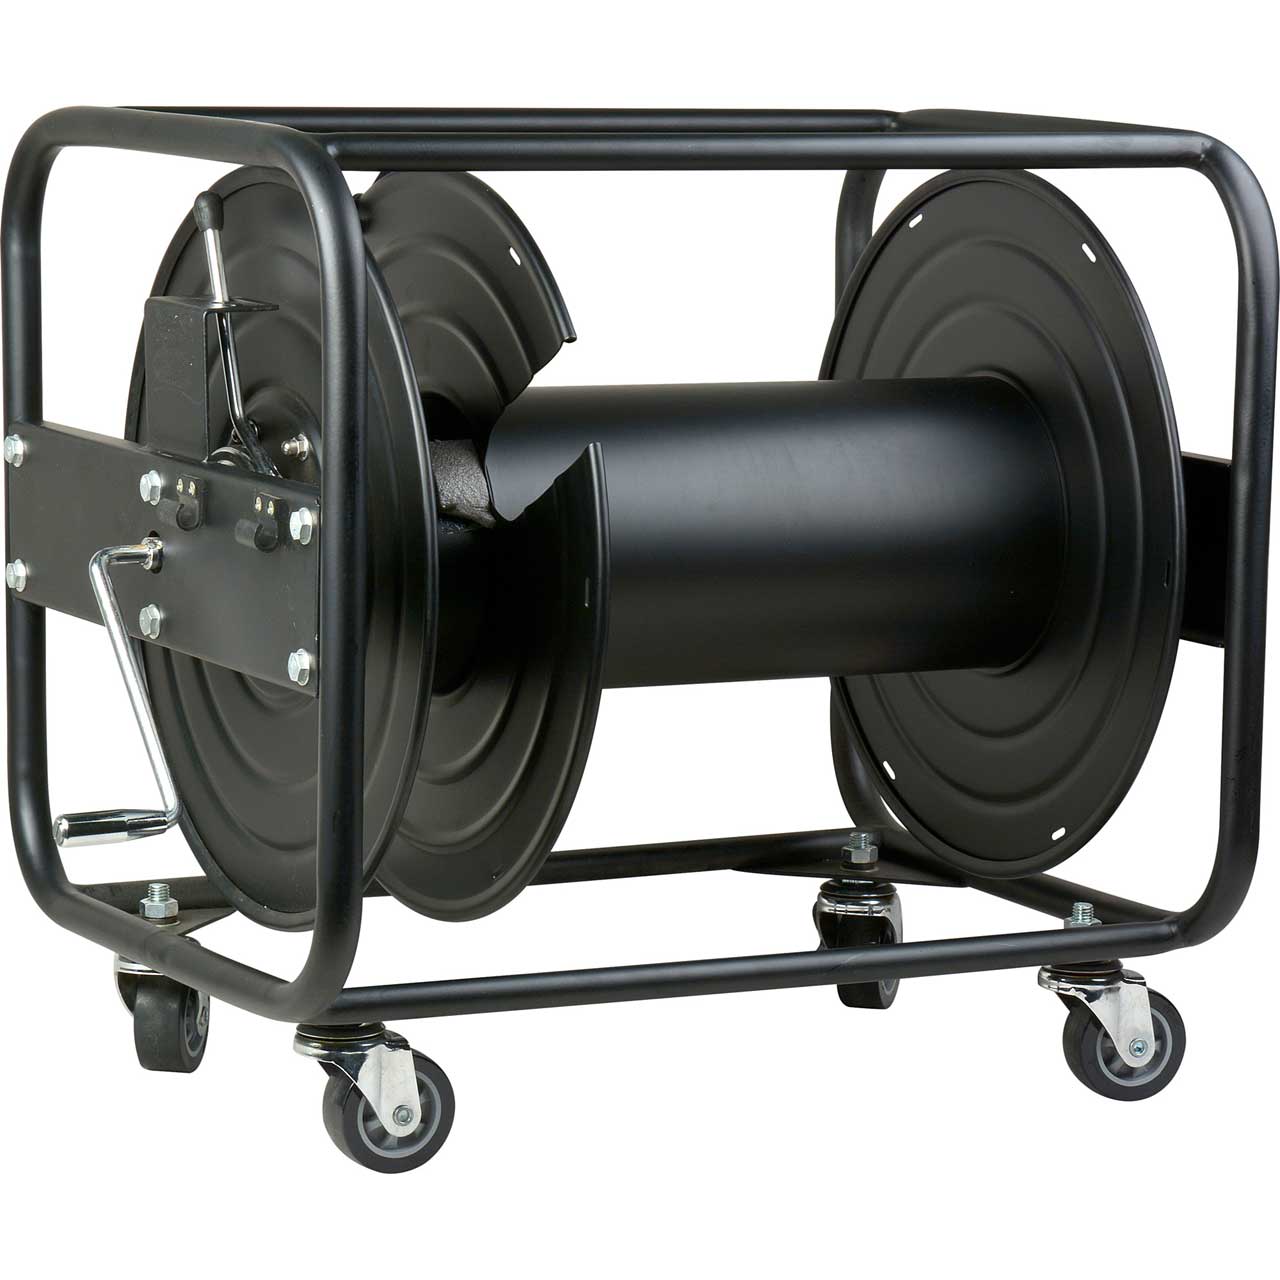 Jackreel Cable Reels High Capacity Broadcast Cable & Fiber Optic Cable Reel